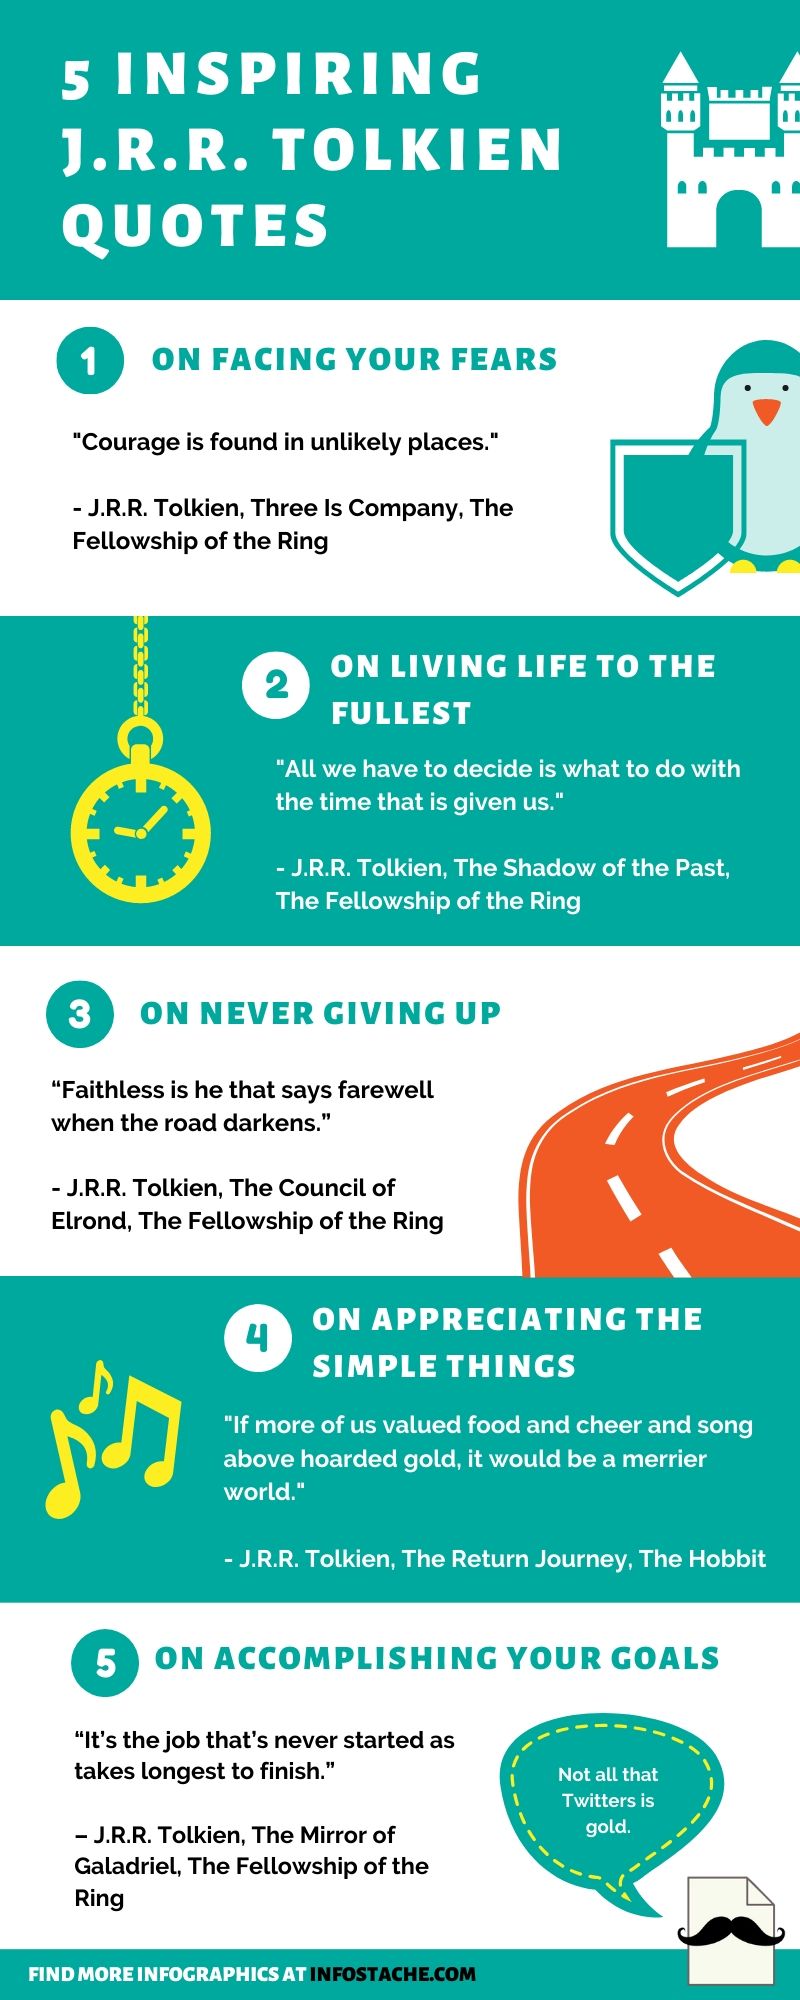 5 Inspiring J.R.R. Tolkien Quotes - Infographic